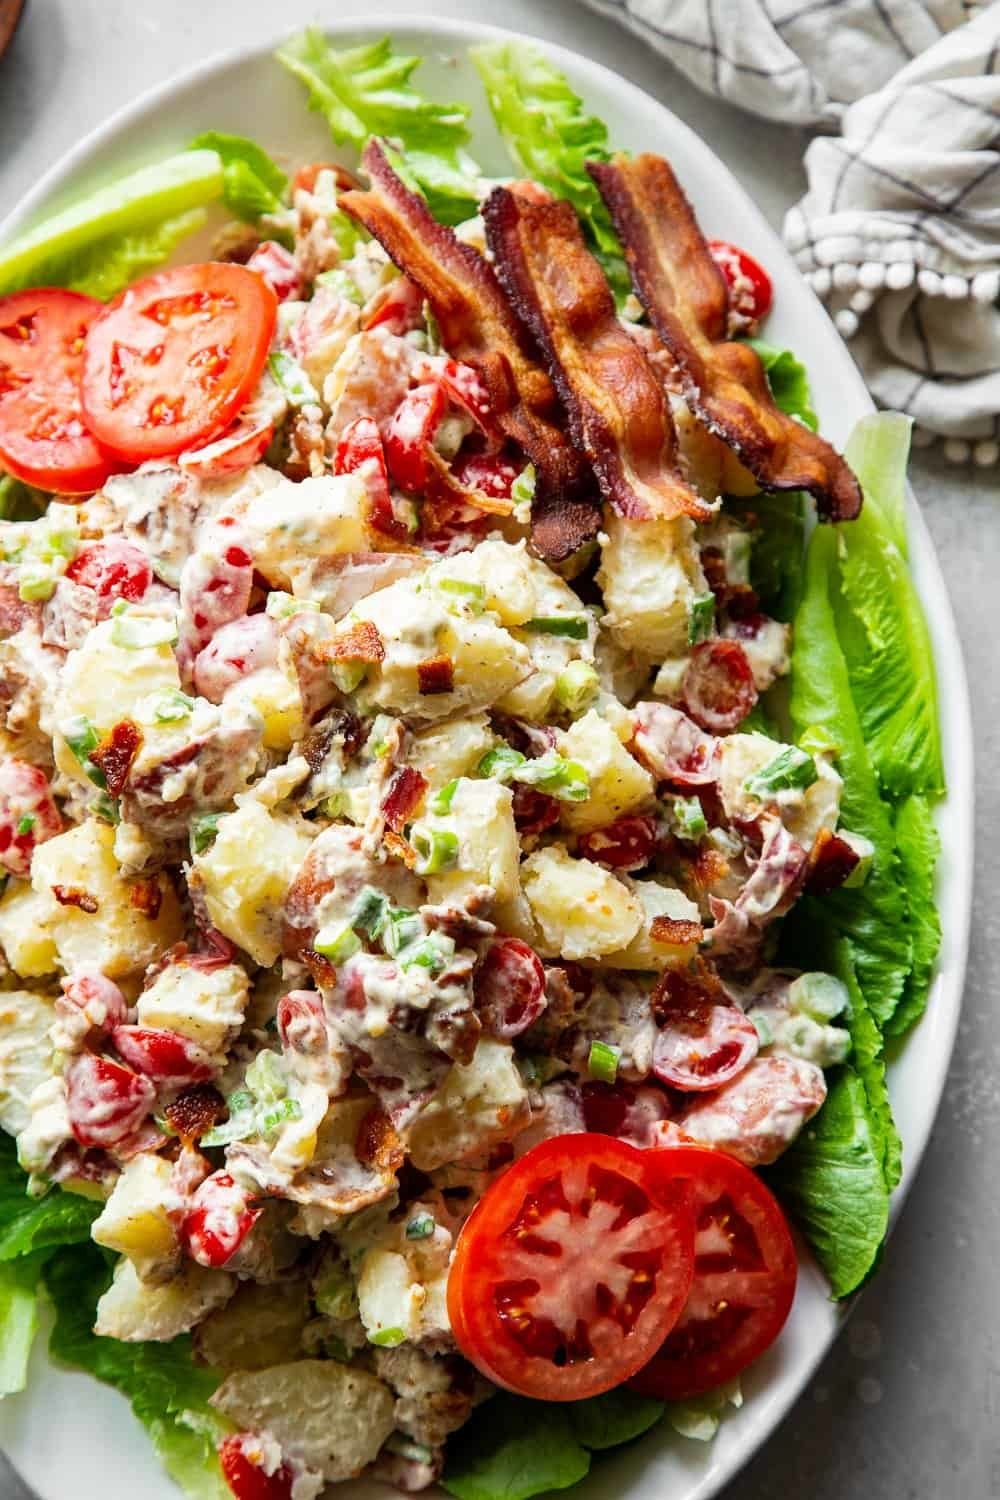 Potato salad with bacon, lettuce and tomato.